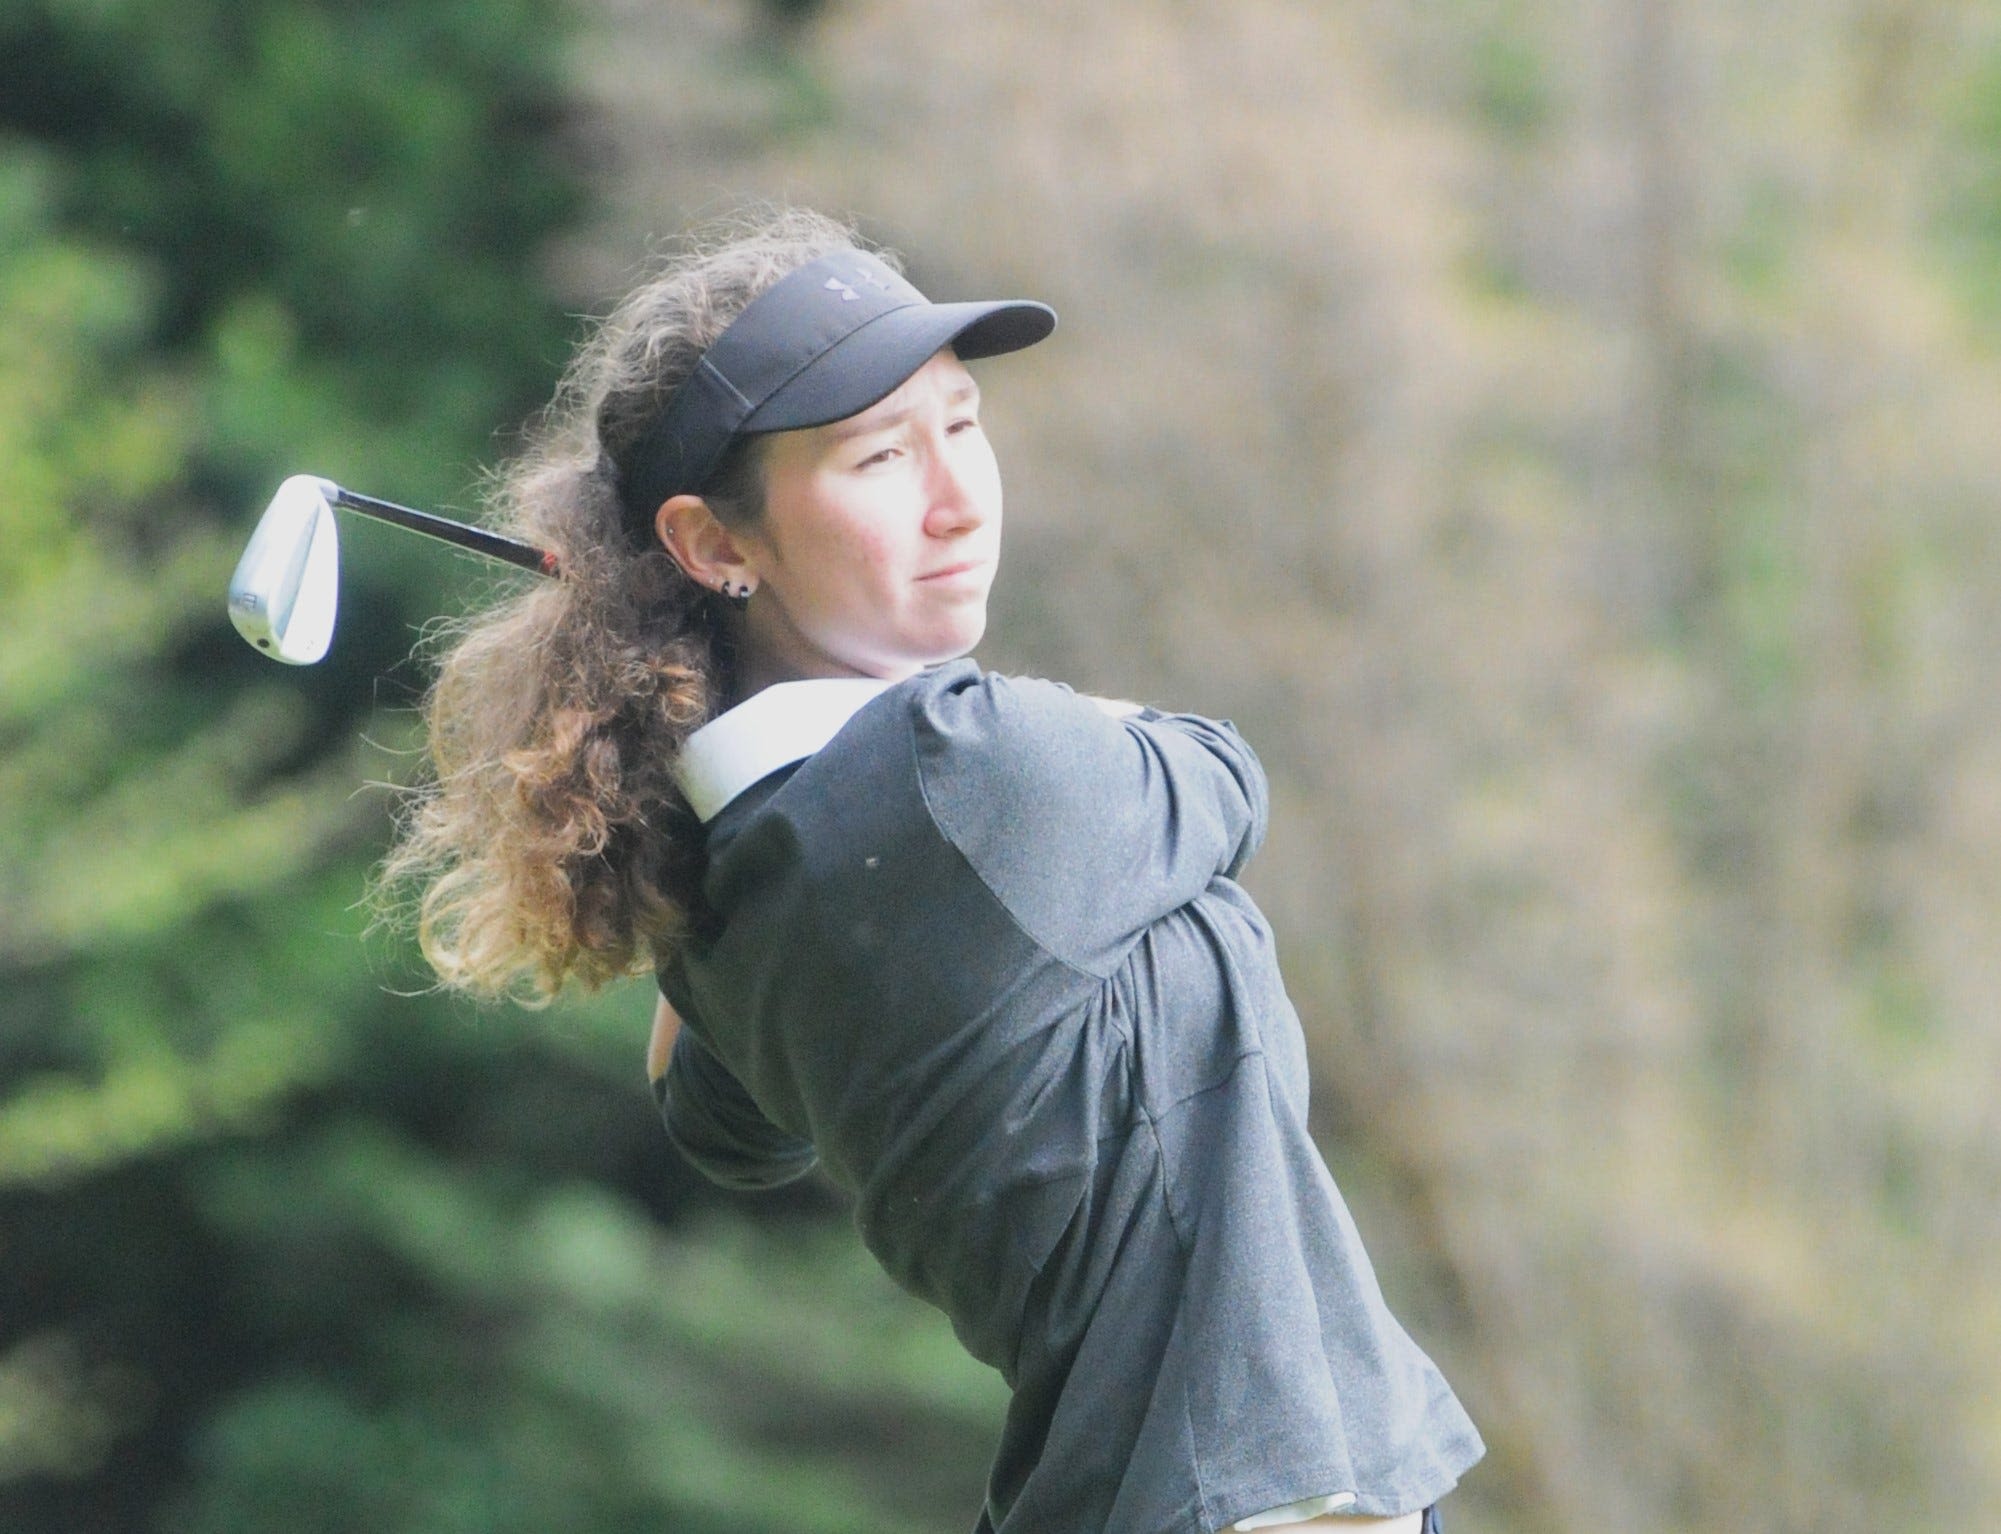 North Eugene's Francesca Tomp looking for third 5A girls golf state title